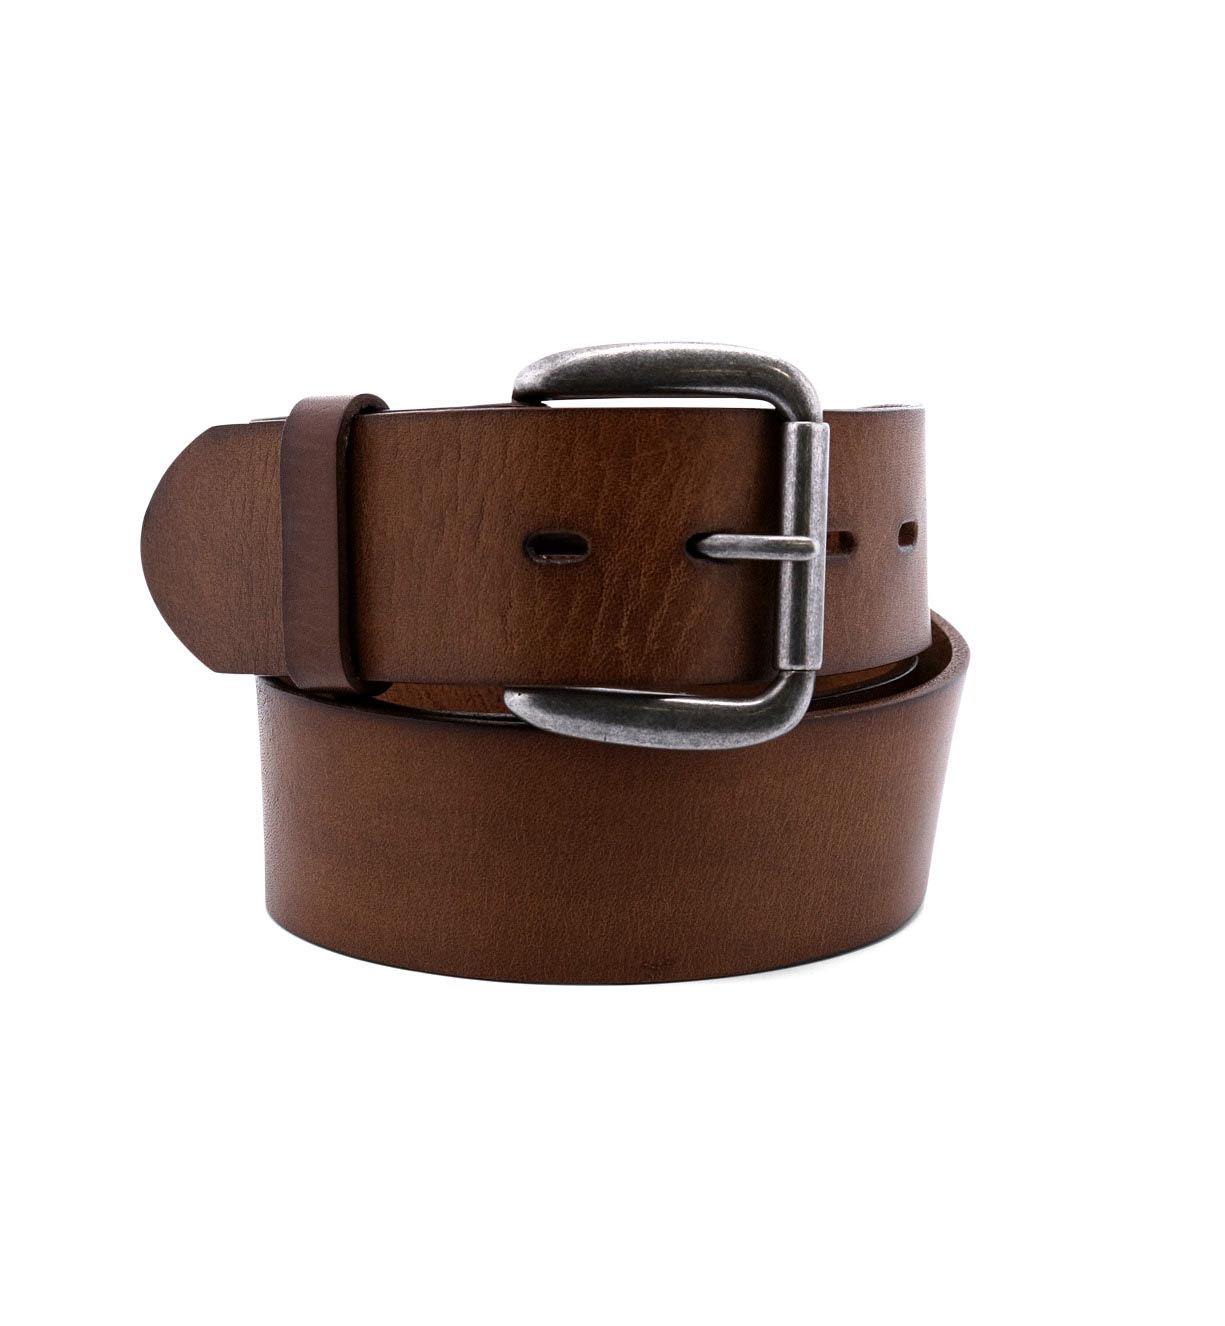 A Bed Stu Hobo leather belt on a white background.